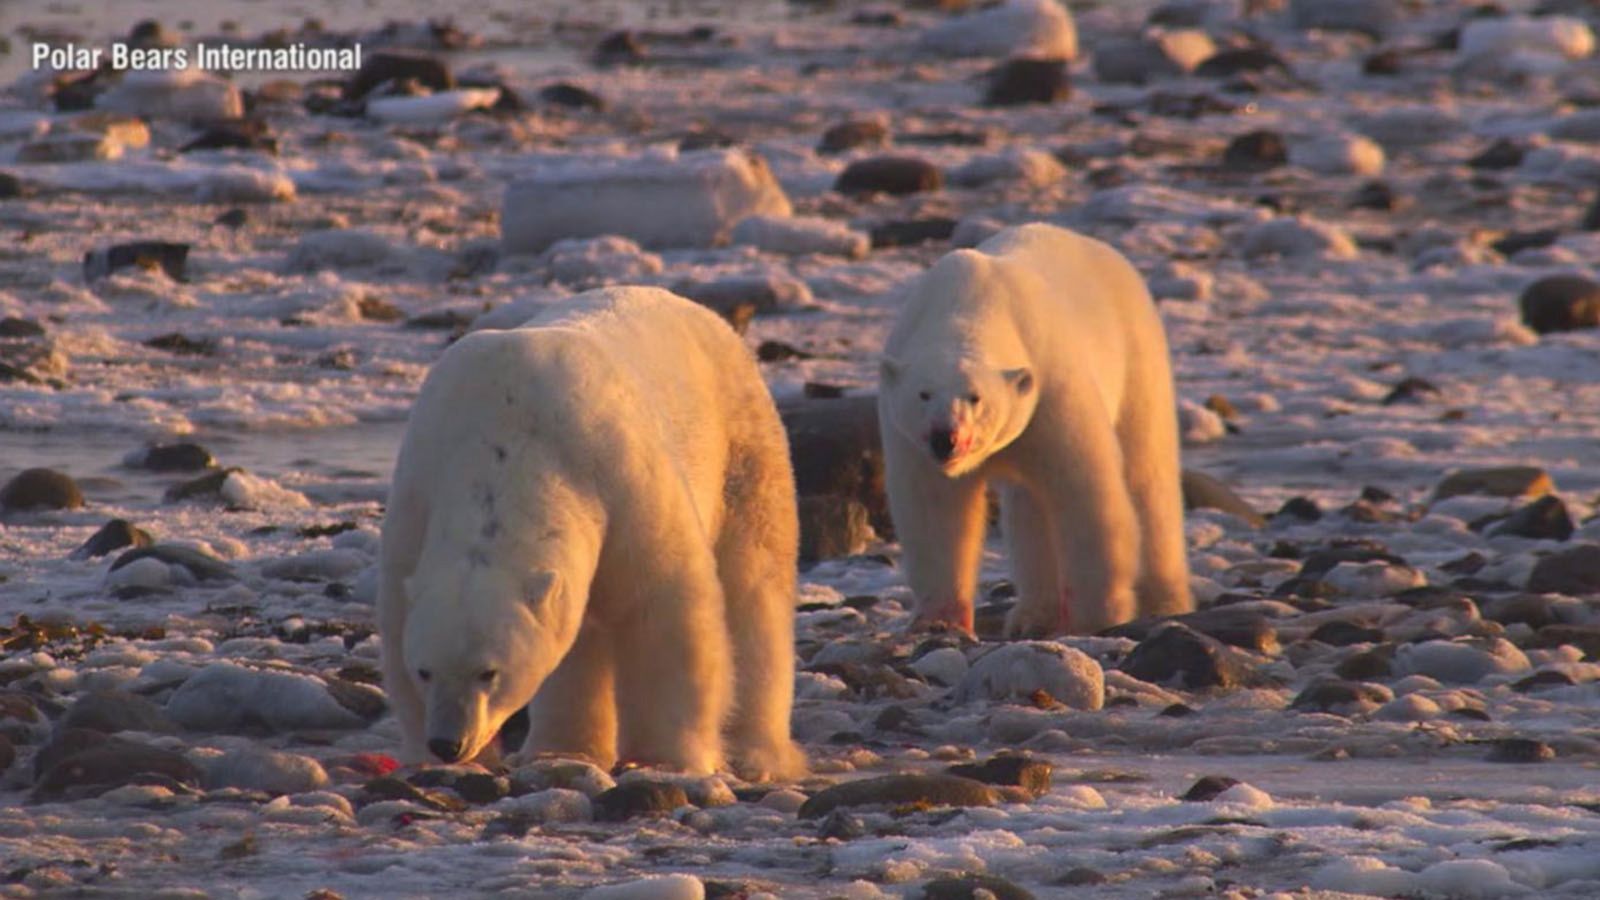 Polar bears changing habitat shows impacts of climate change